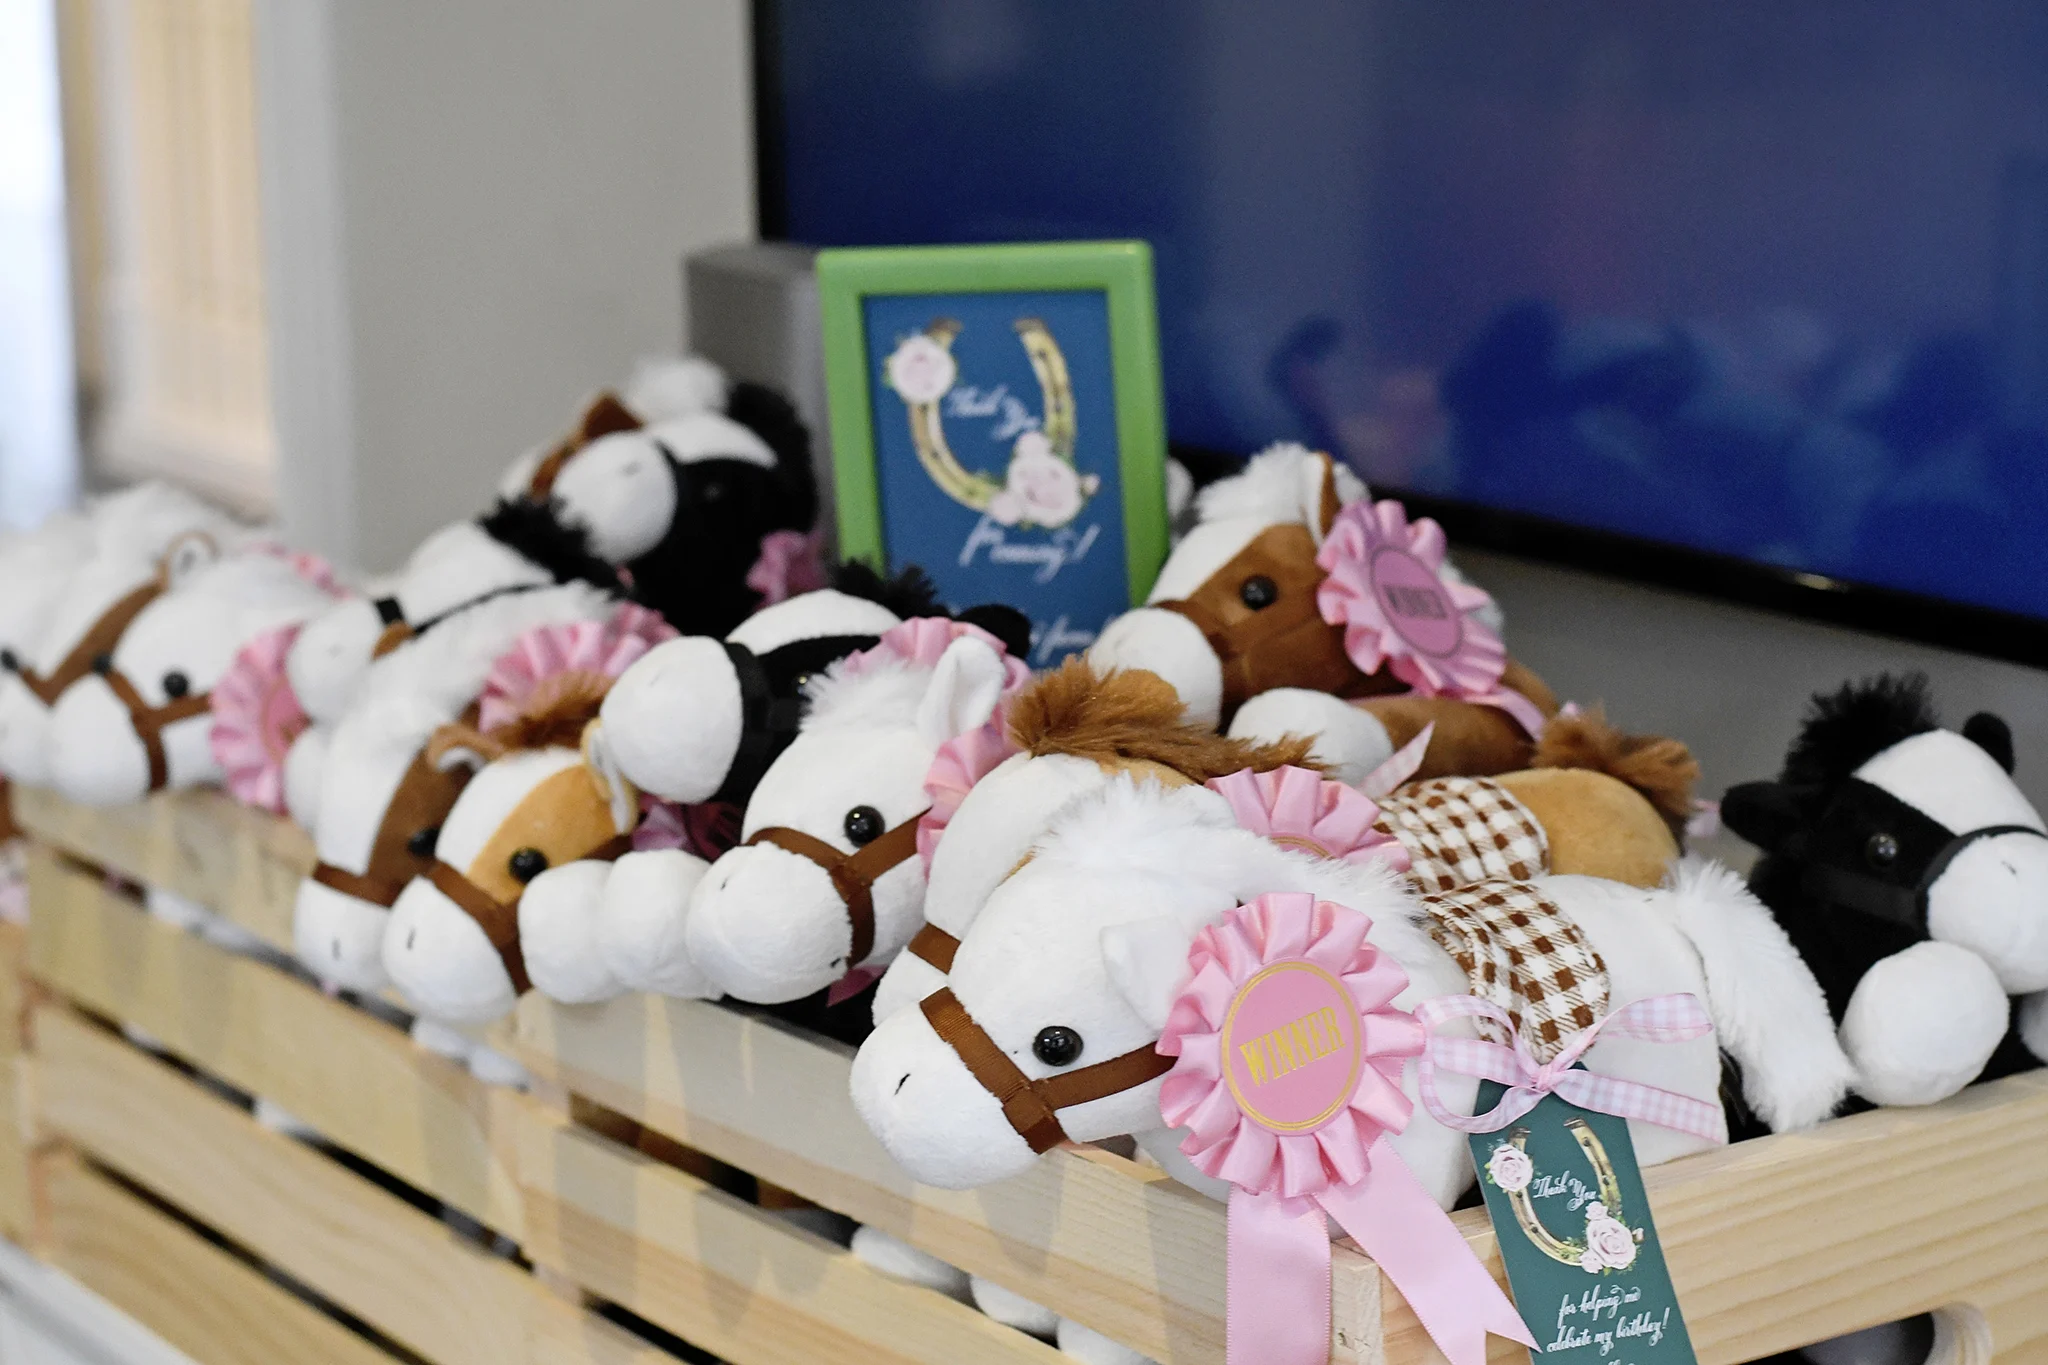 Plush horses served as party favors!